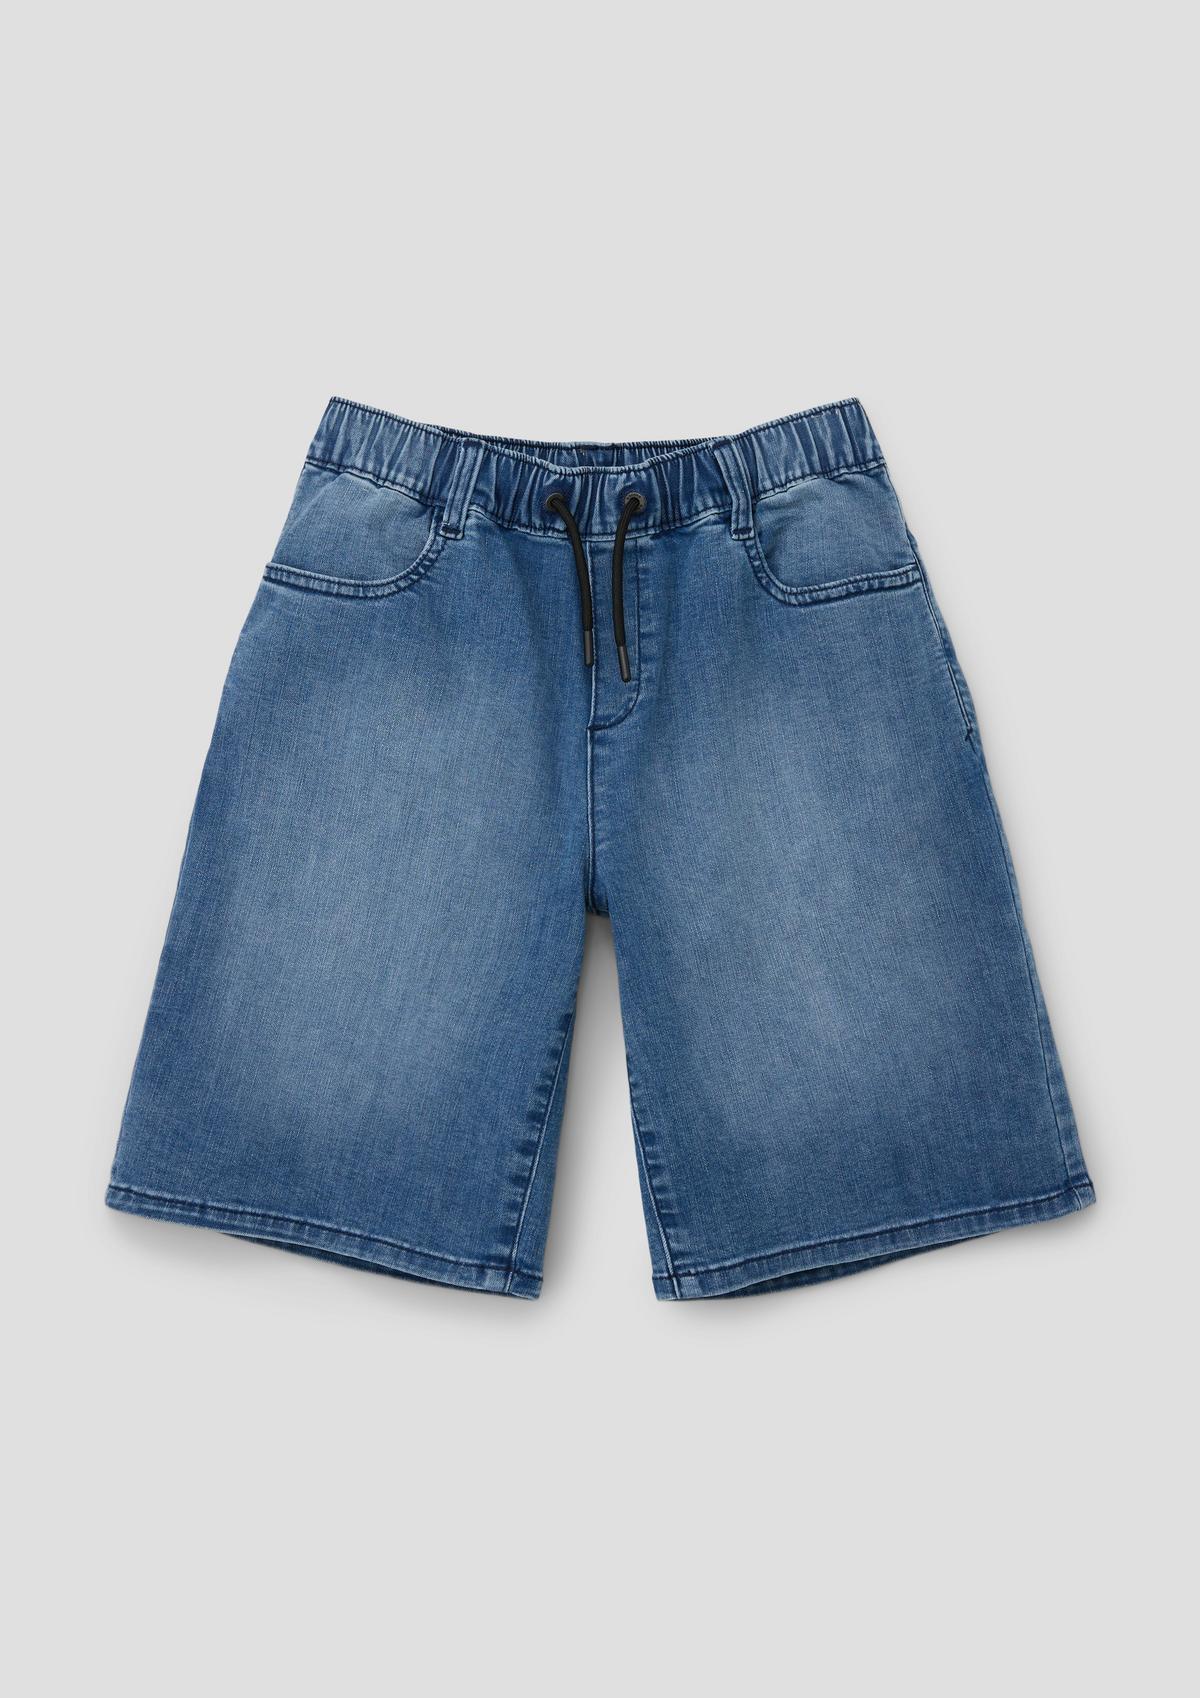 s.Oliver Relaxed fit: denim Bermudas with a drawstring